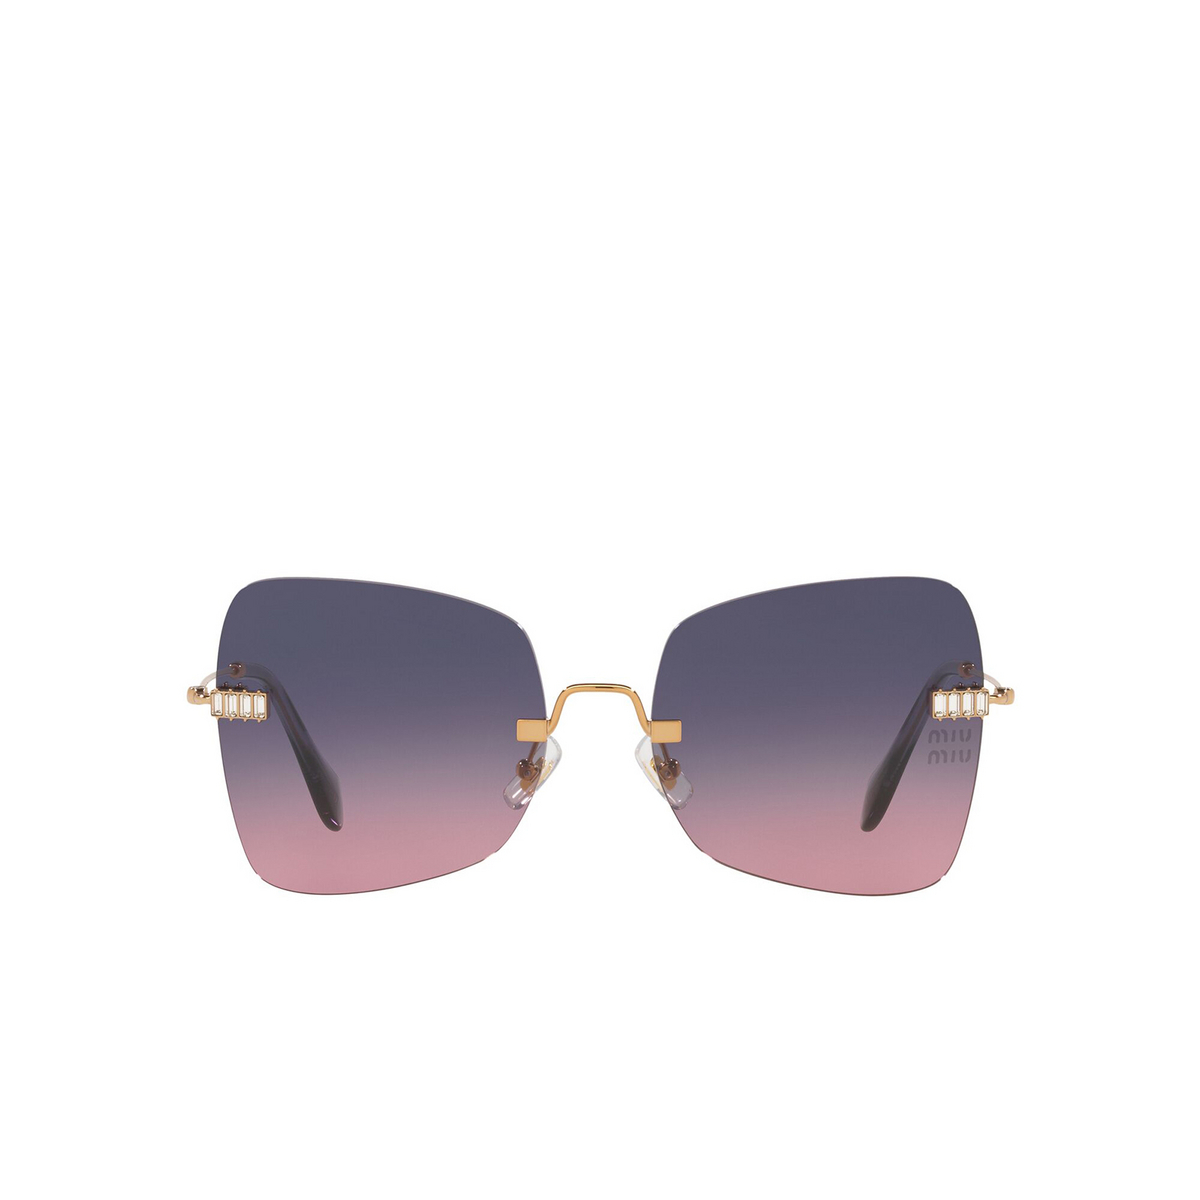 Miu Miu® Butterfly Sunglasses: MU 51WS color Antique Gold 7OE06N - front view.